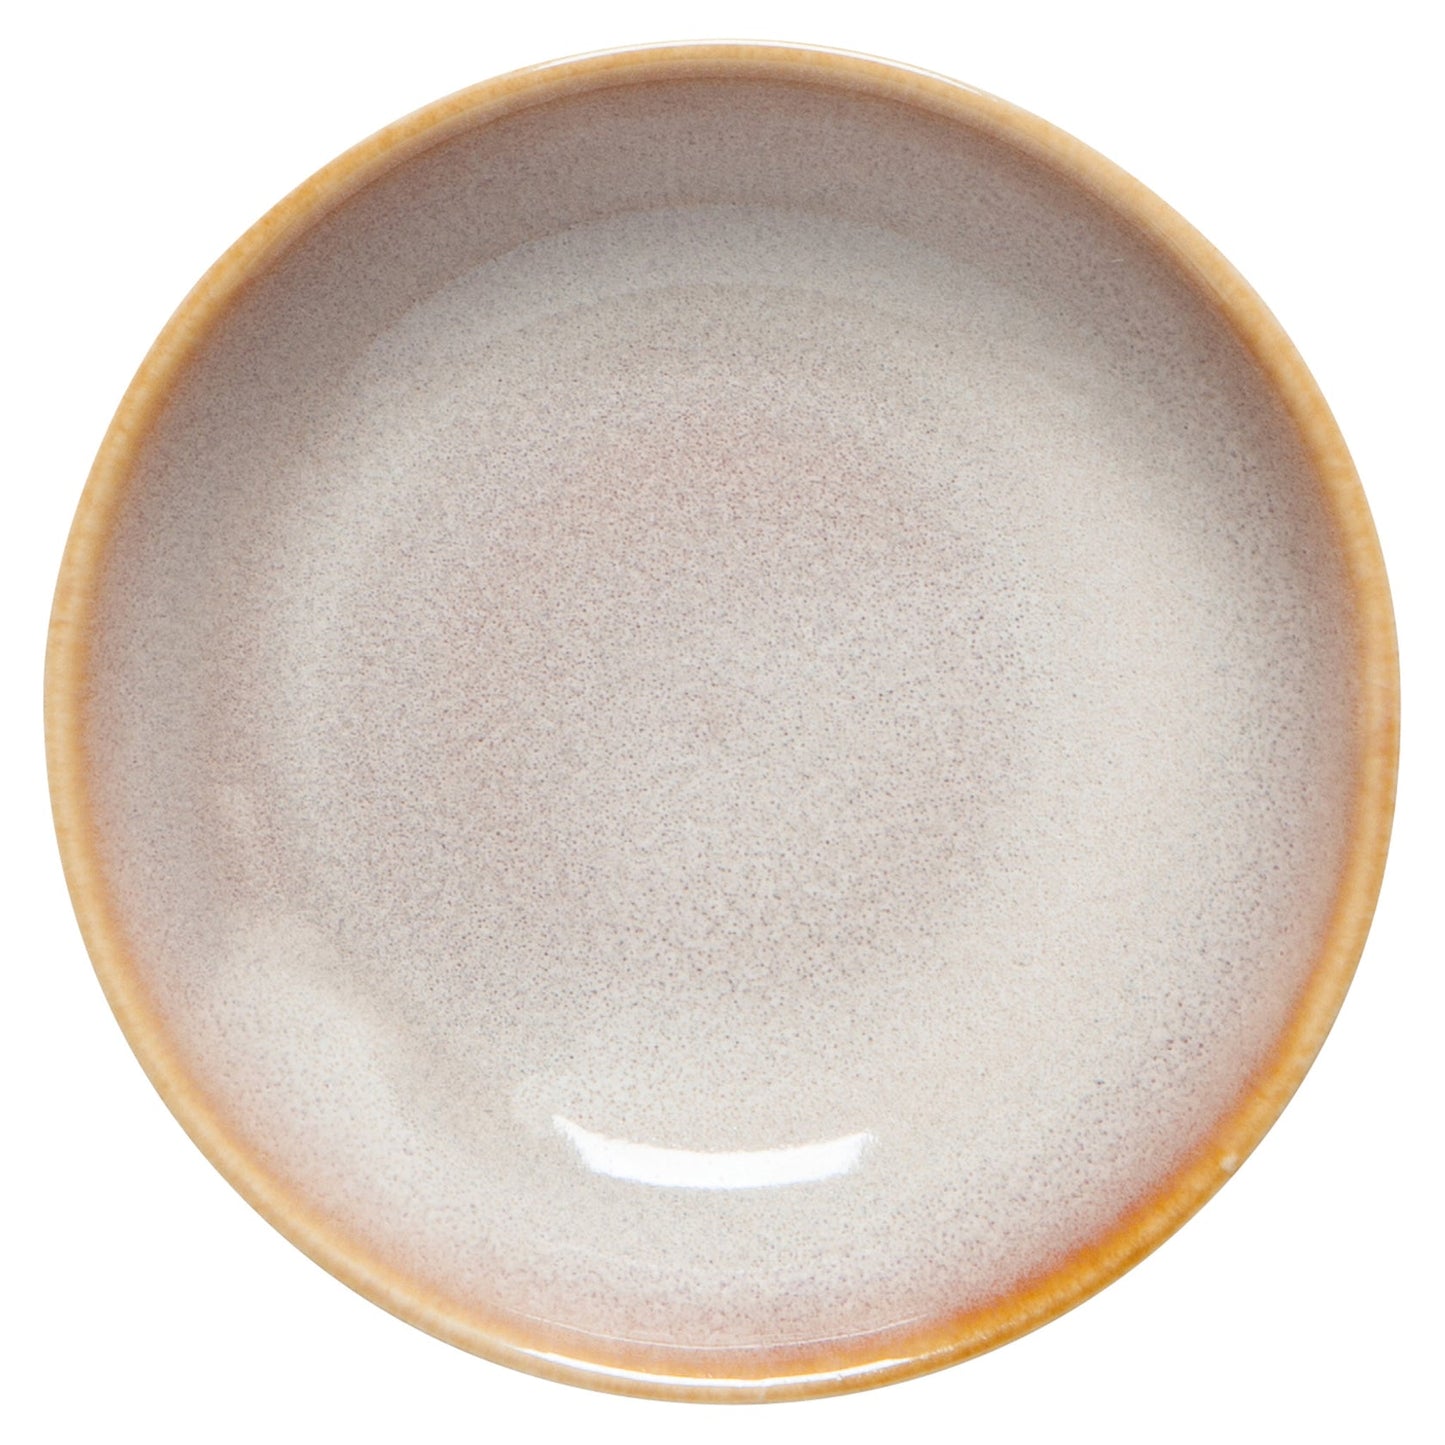 Nomad Stone Dipping Dish Set of 4